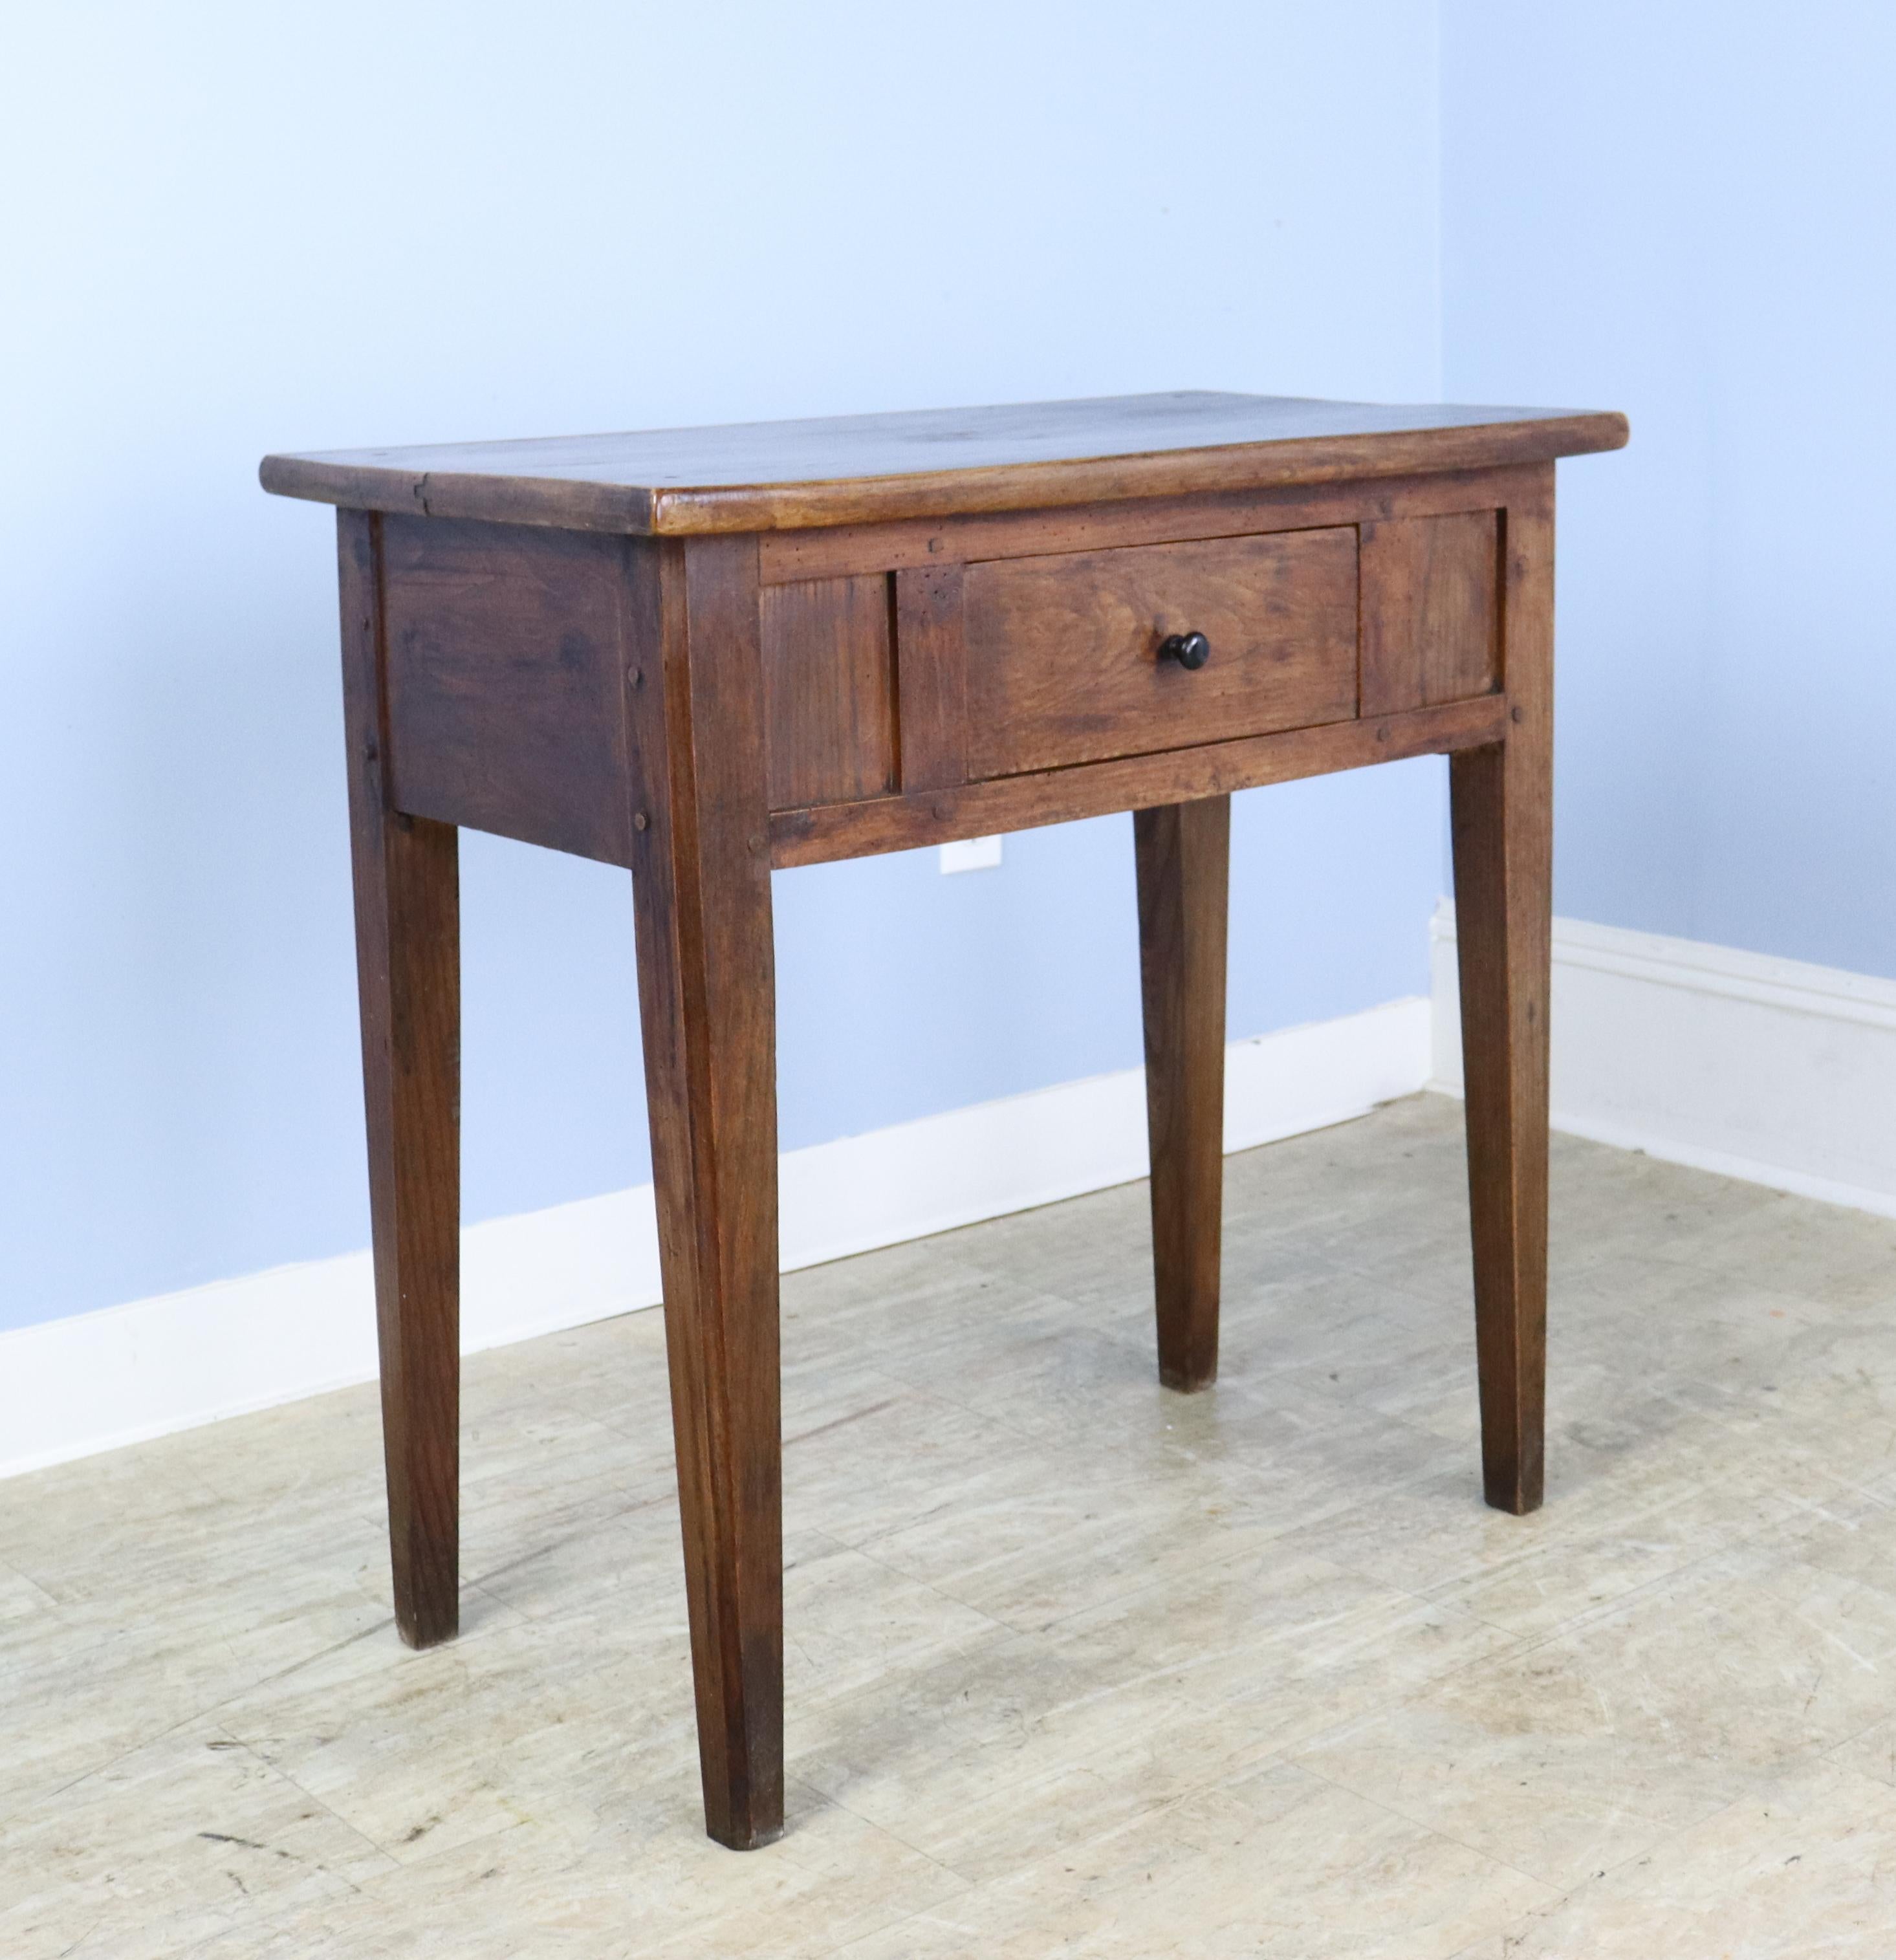 A small serving or side table, with stylish wood detail on the front and a roomy center drawer. This piece is the right size and height to use as a hall table, in a vestibule, or in a smaller dining or living room. The elm has very nice color, grain